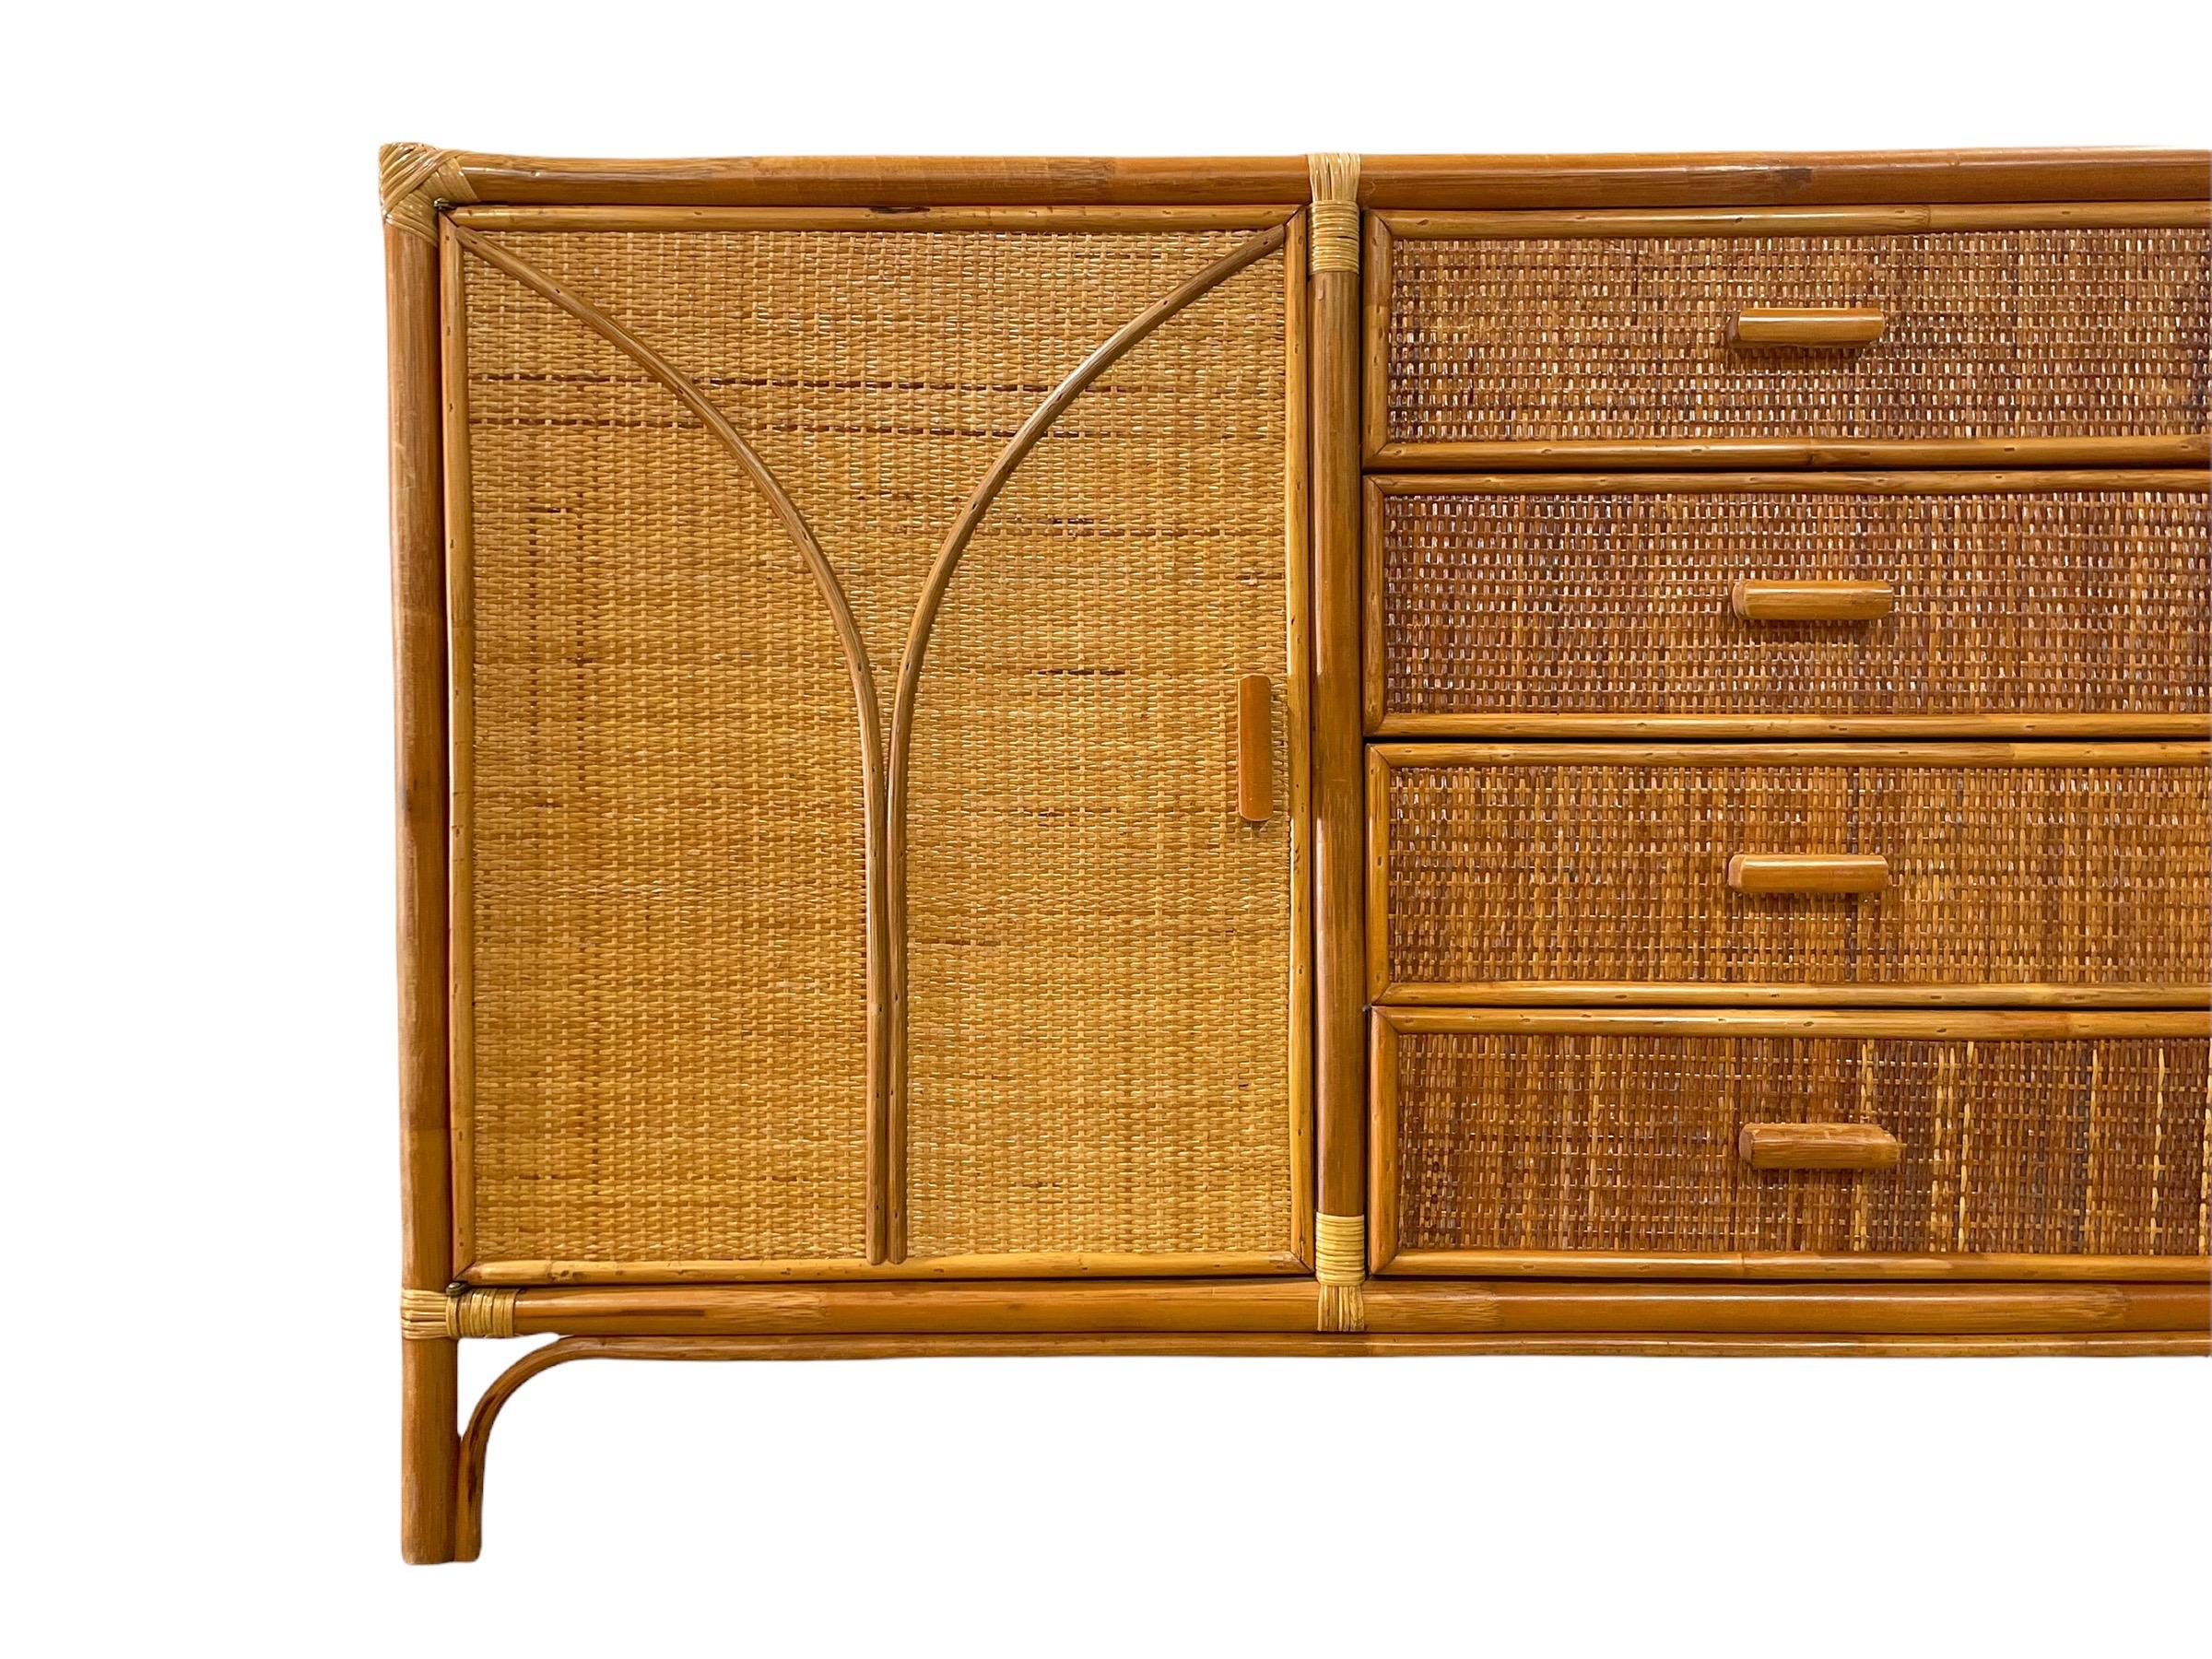 Stunning organic modern mid century buffet credenza, circa 1970s. Rattan and Mahogany case with raffia veneer and bamboo detail on the door facades. Four center doors flanked on both sides by shelved cabinet space. Time capsule piece - this credenza